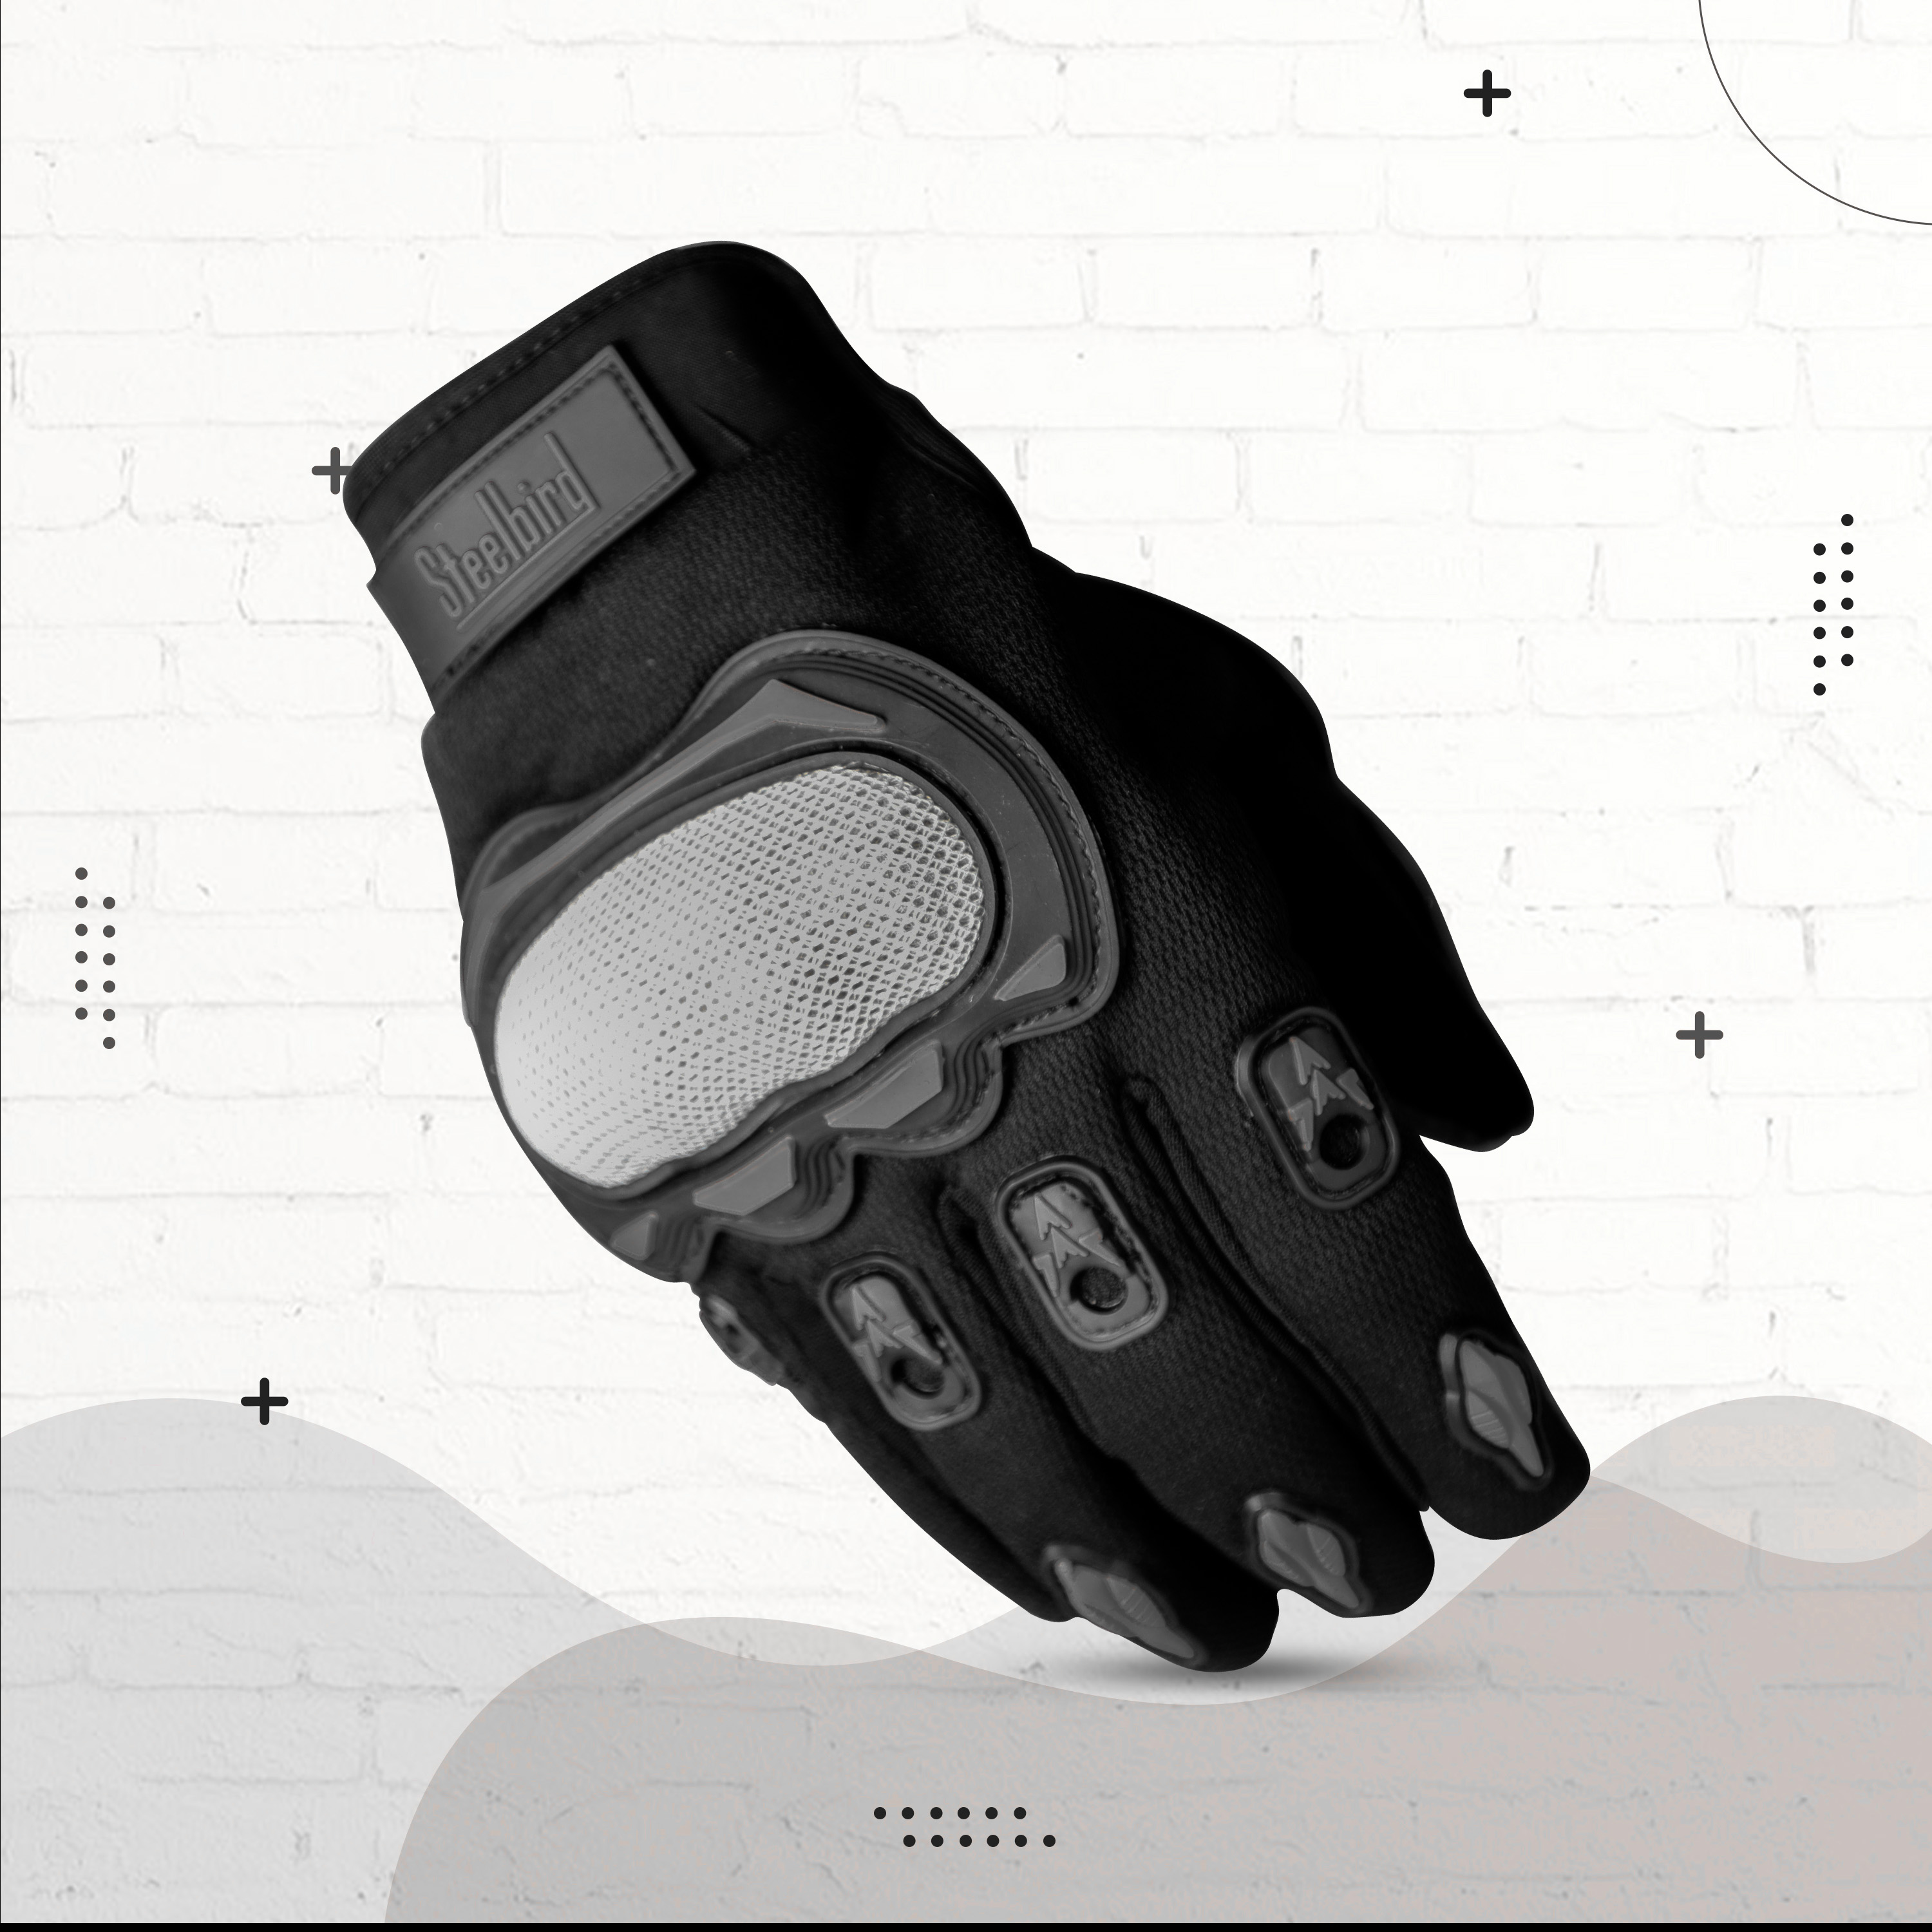 Steelbird Experience 1.0 Reflective Full Finger Bike Riding Gloves With Touch Screen Sensitivity At Thumb And Index Finger, Protective Off-Road Motorbike Racing (Black Grey)